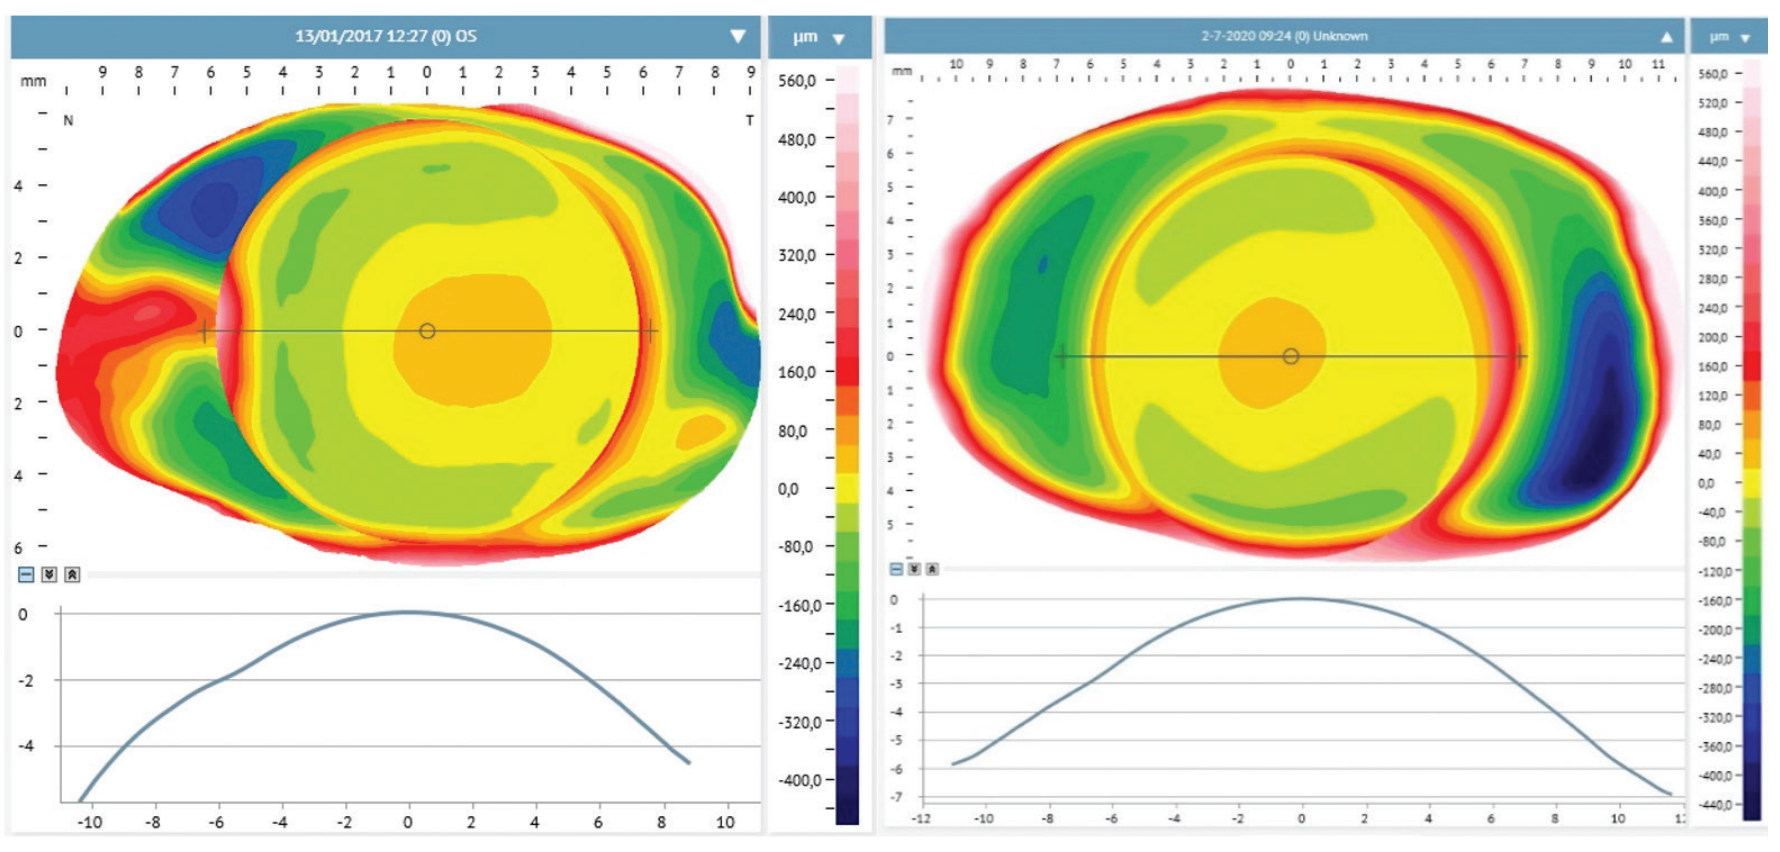 The relationship between myopia and conjunctival-scleral geometry